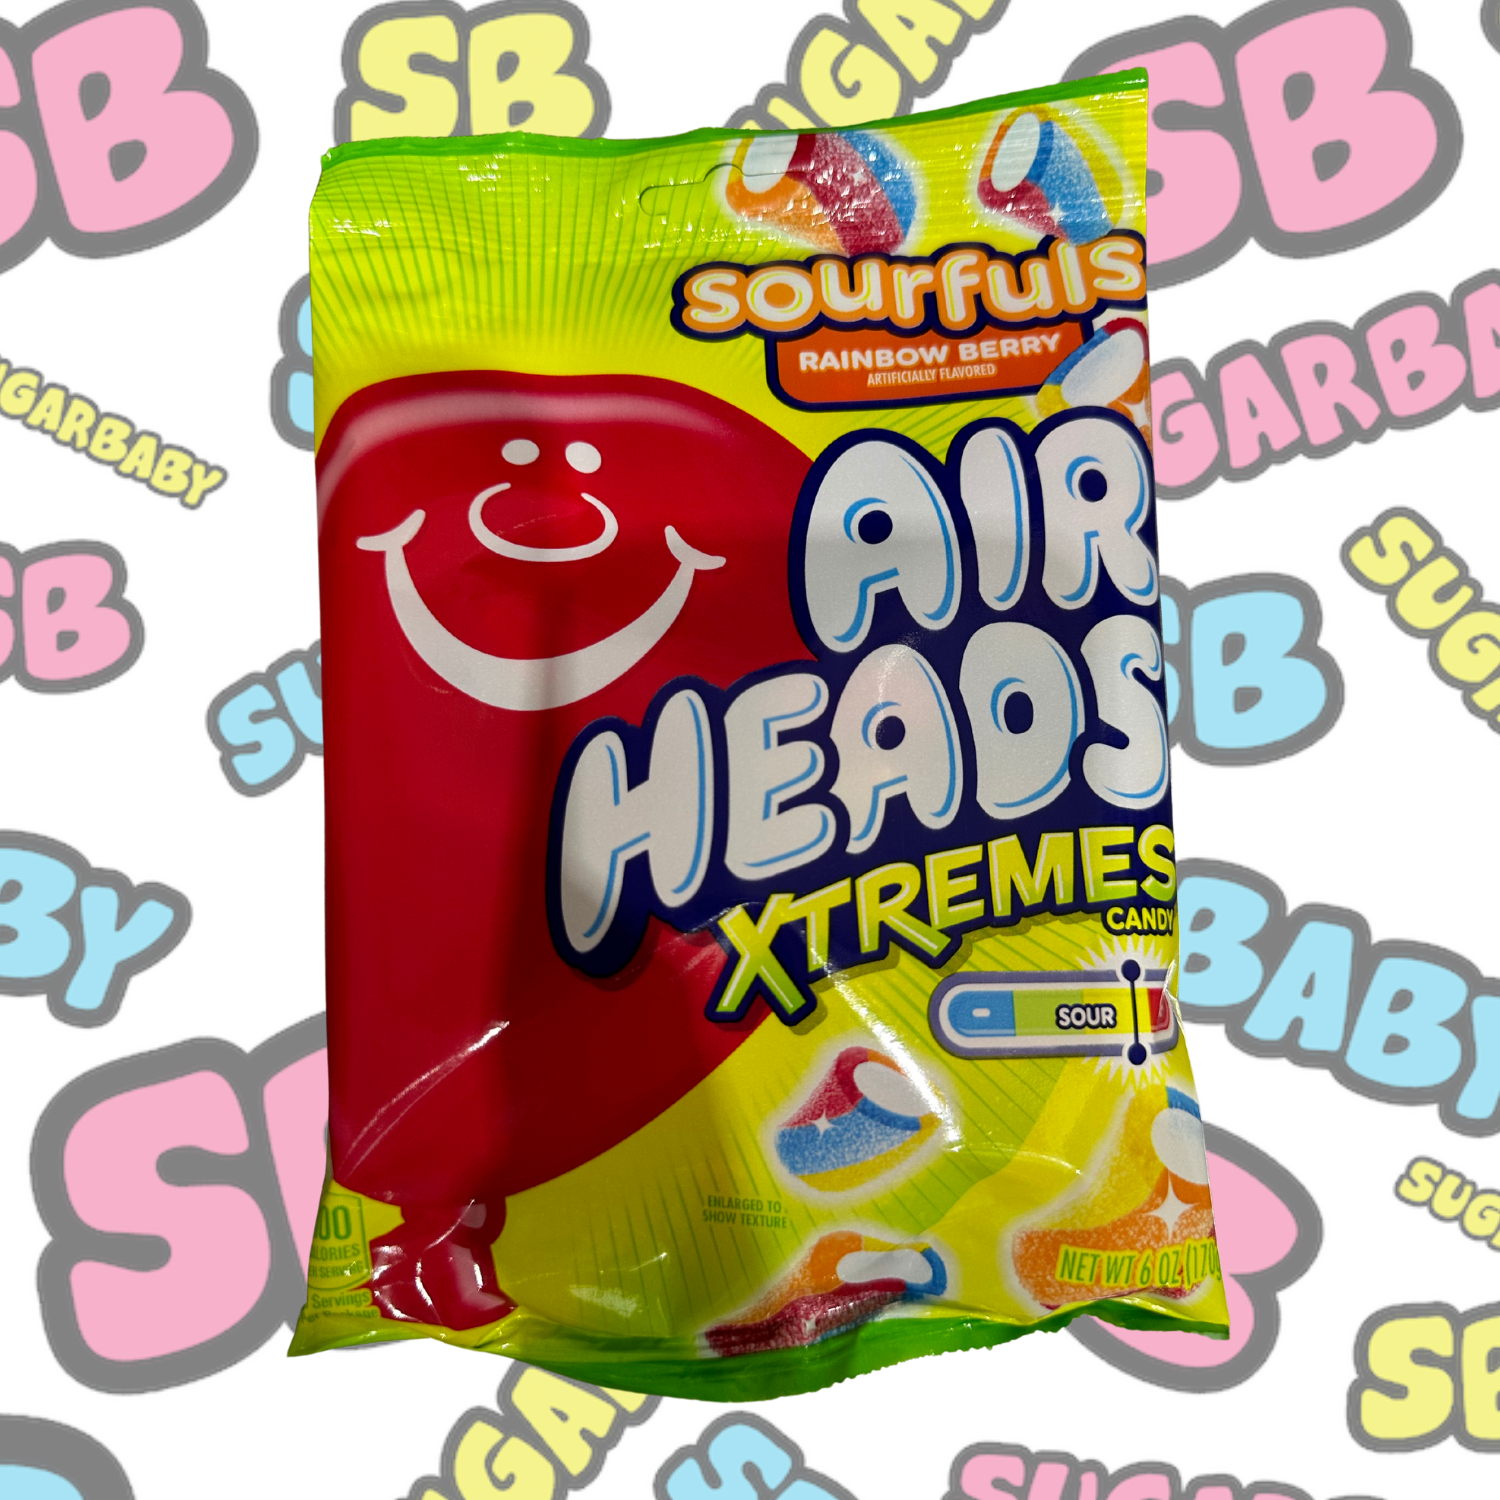 Airheads XTREMES Sourfuls Rainbow Berry